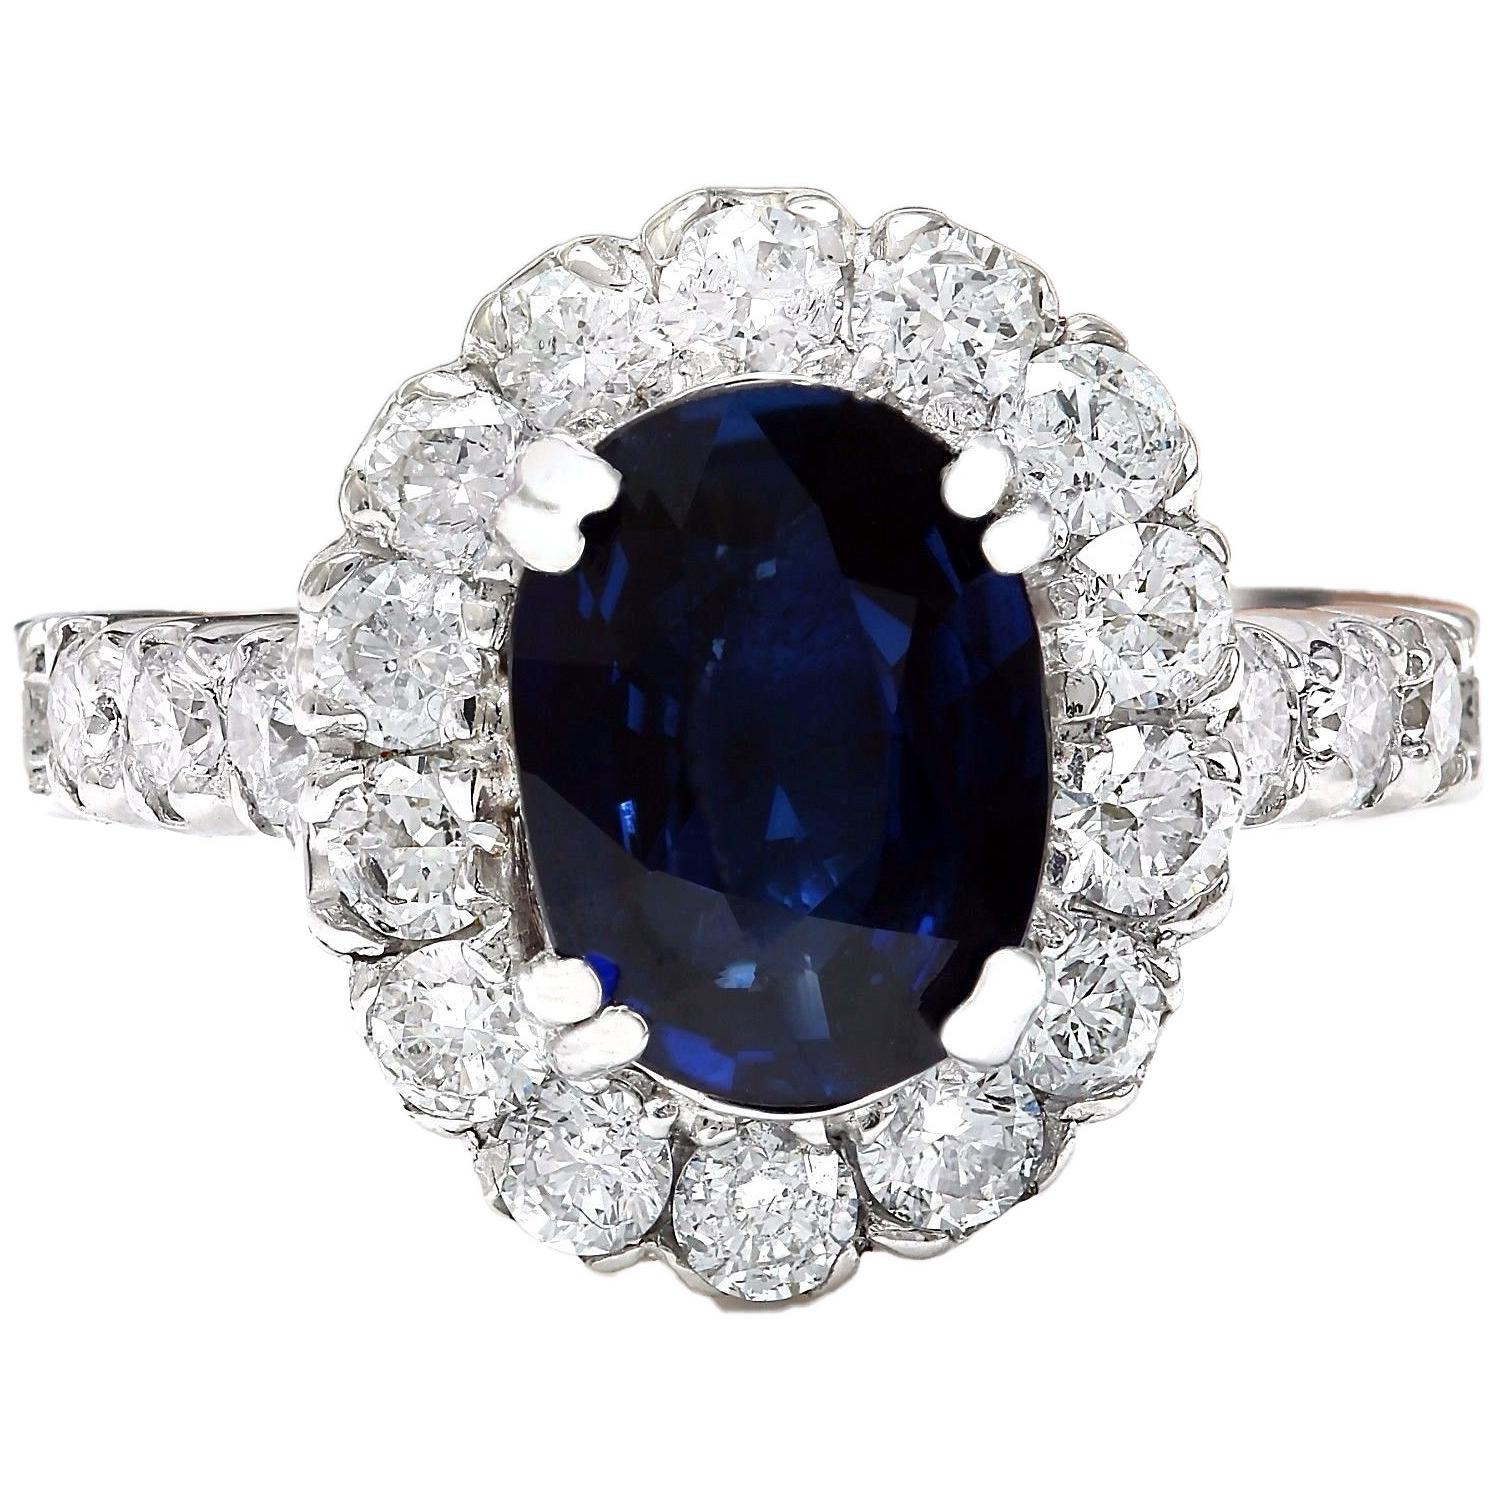 3.35 Carat Natural Sapphire 14K Solid White Gold Diamond Ring
 Item Type: Ring
 Item Style: Engagement
 Material: 14K White Gold
 Mainstone: Sapphire
 Stone Color: Blue
 Stone Weight: 2.55 Carat
 Stone Shape: Oval
 Stone Quantity: 1
 Stone